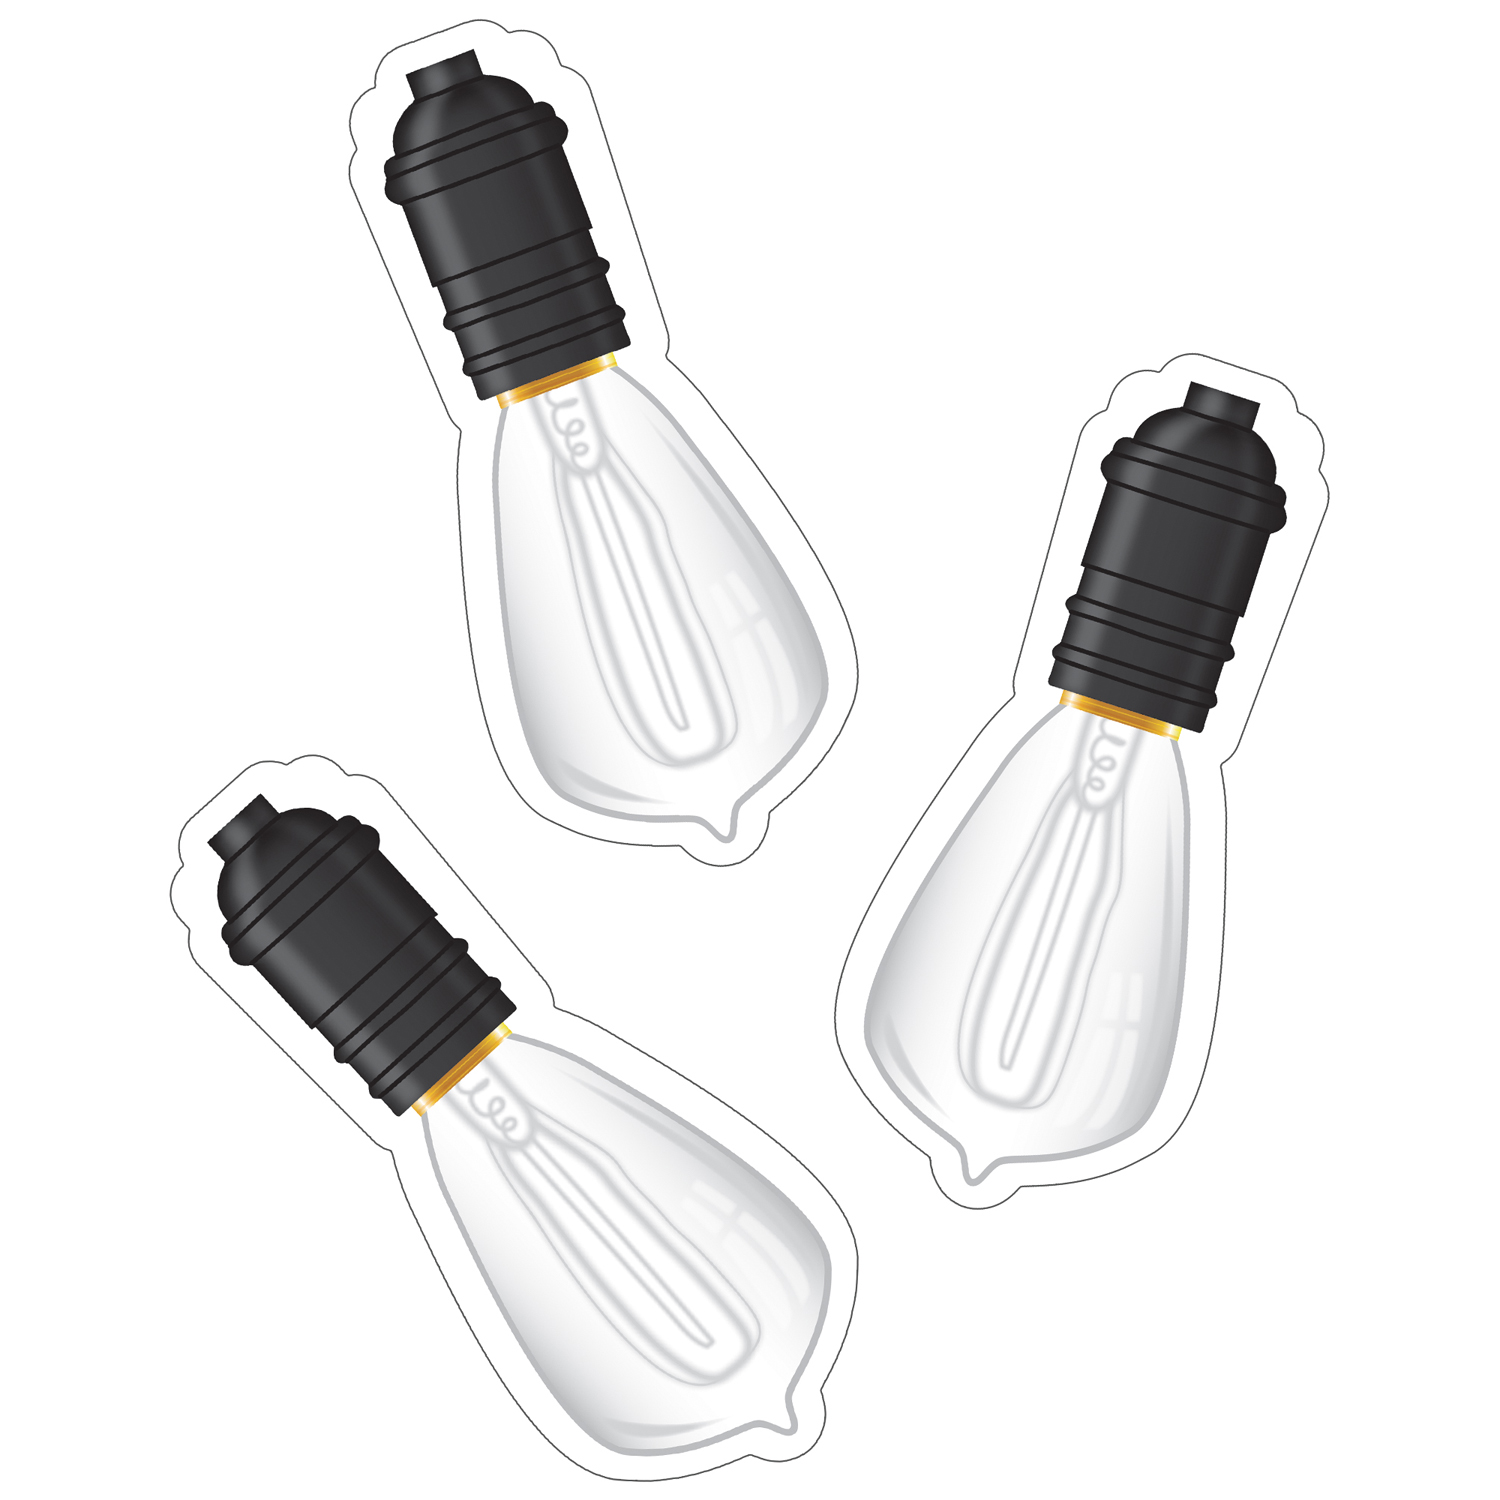 Industrial Cafe Vintage Light Bulb Cut-Outs, Pack of 36